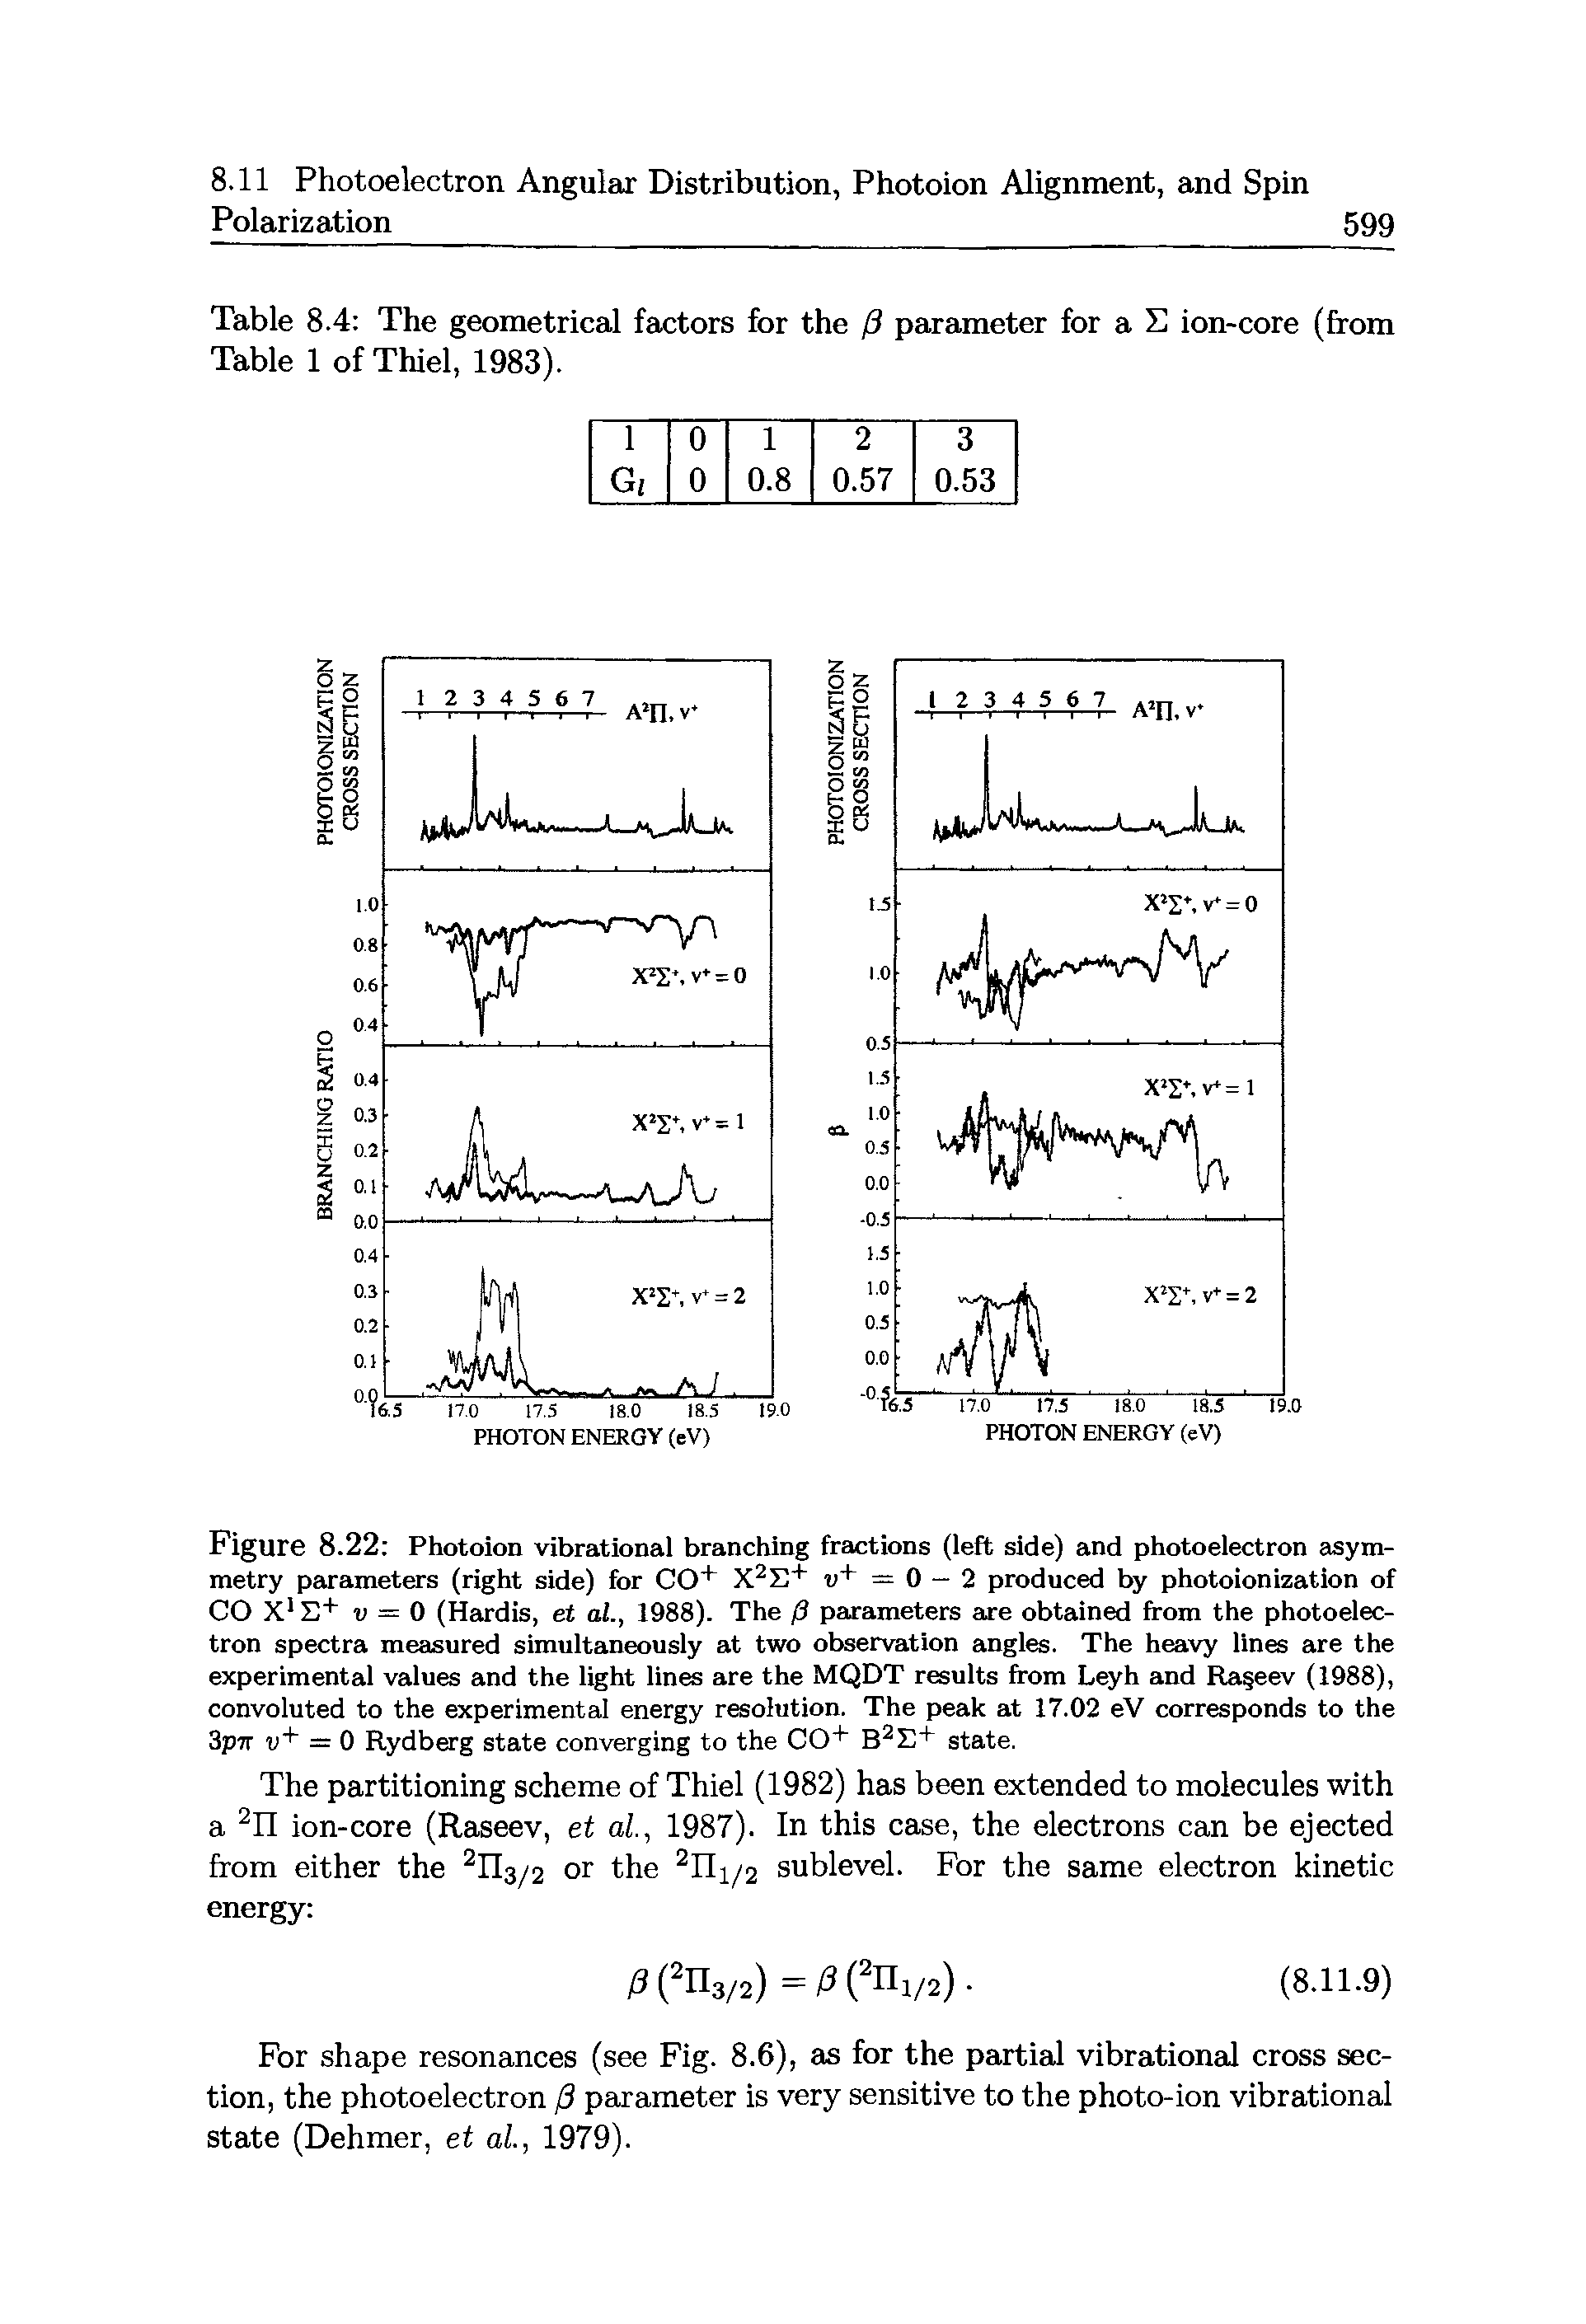 Table 8.4 The geometrical factors for the P parameter for a ion-core (from Table 1 of Thiel, 1983).